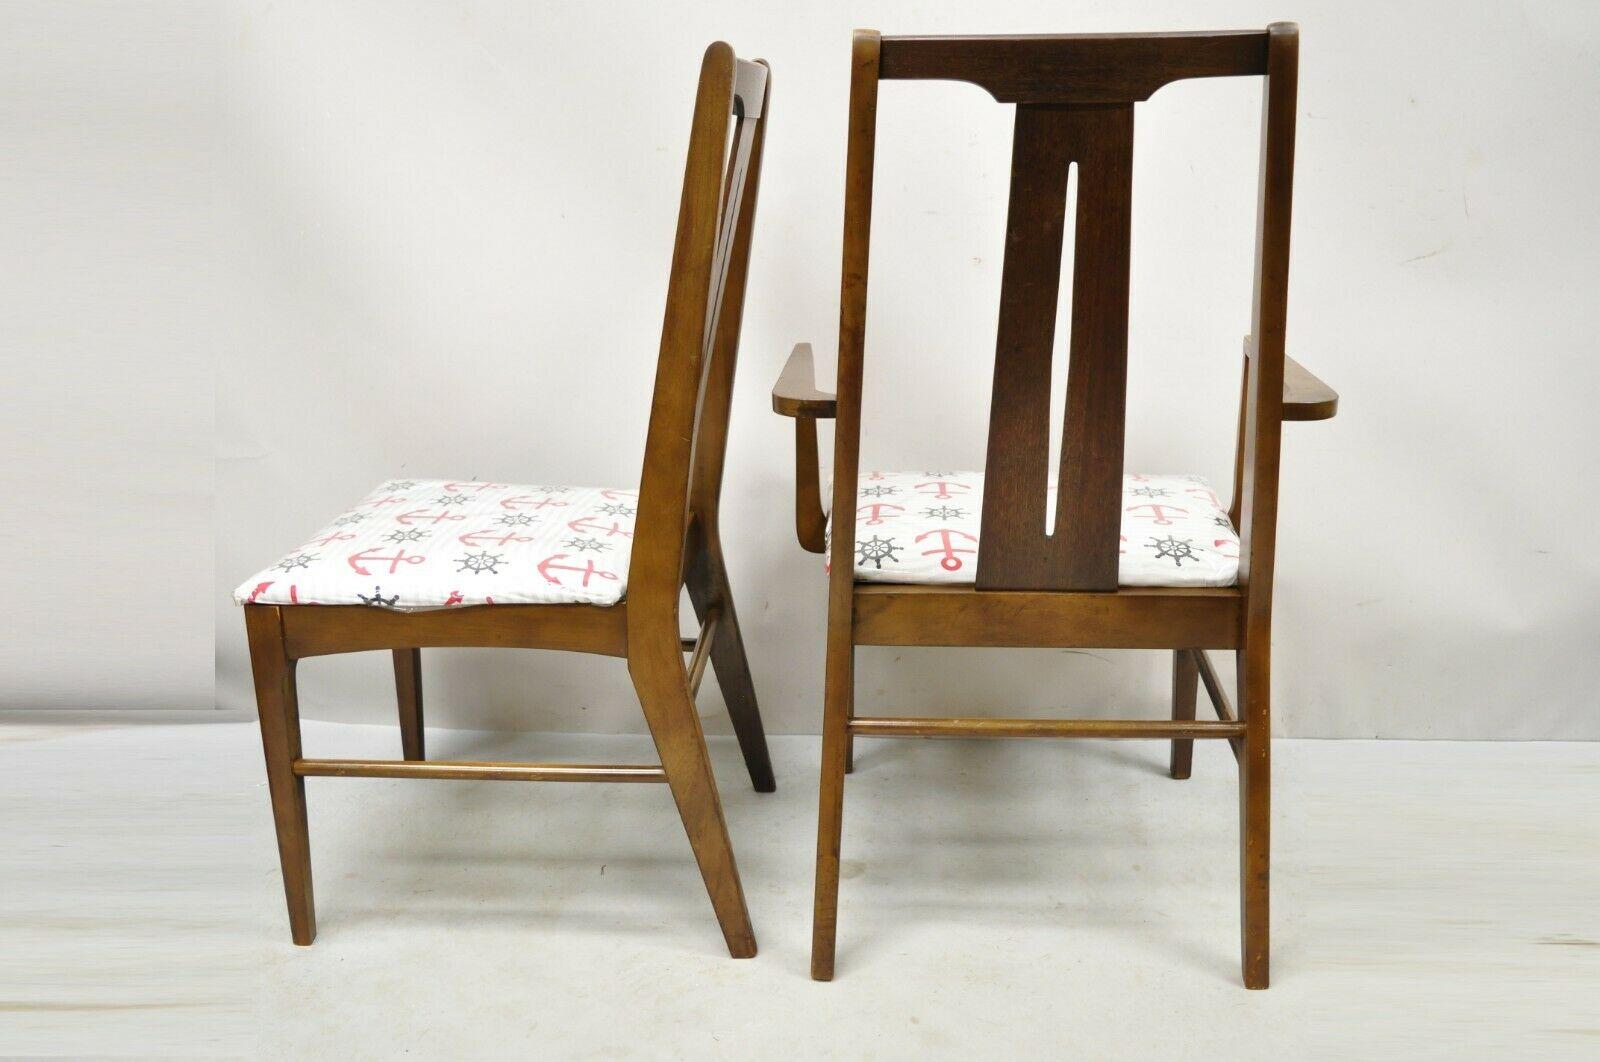 Vintage Mid Century Modern Walnut Dining Room Chairs - Set of 6 For Sale 2